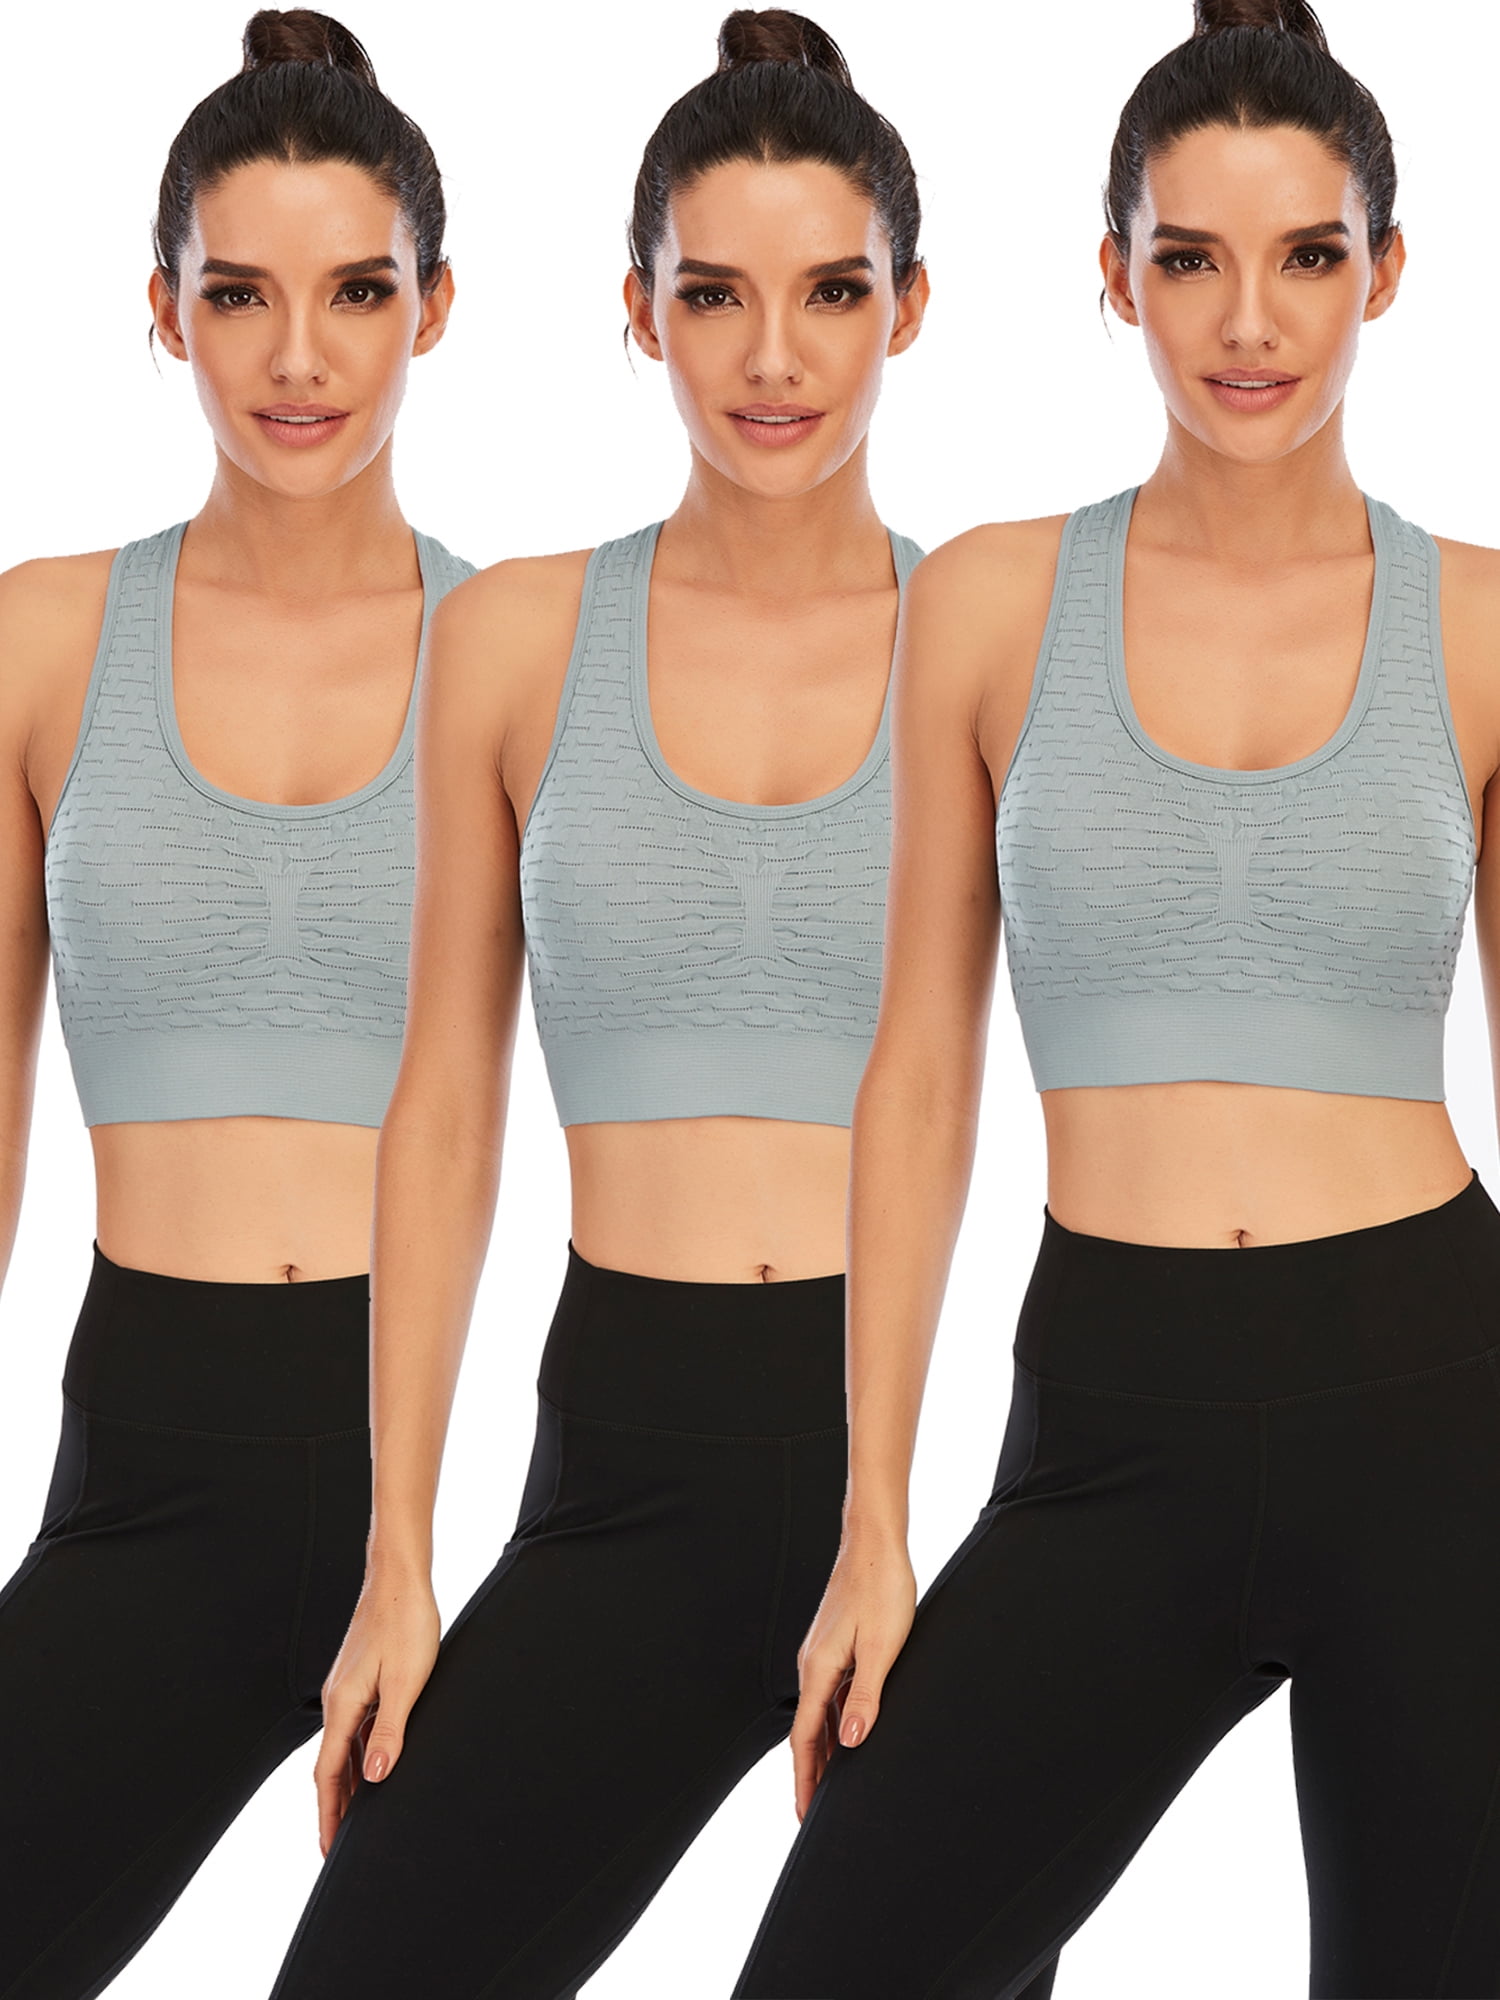 YouLoveIt Racerback Sports Bra for Women, 3 pack Removable Pad